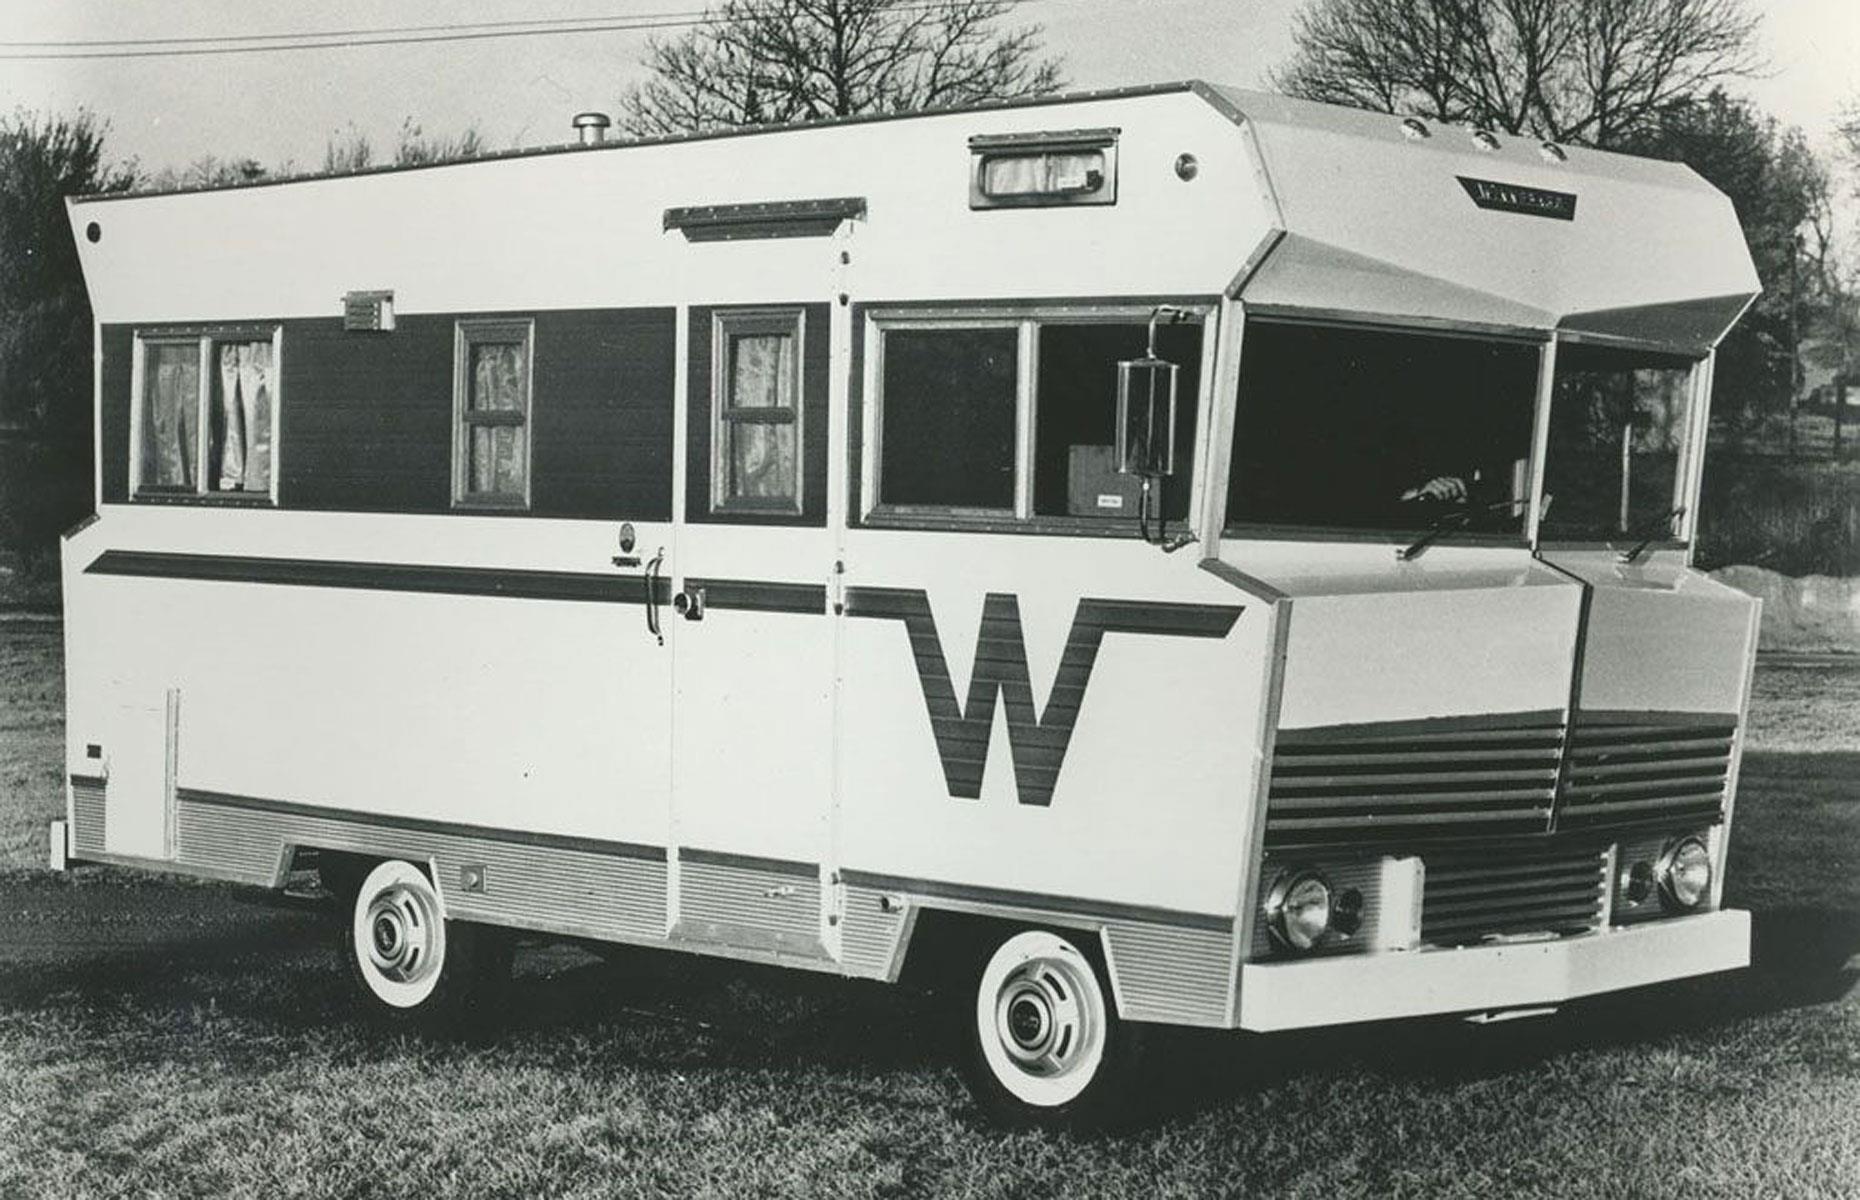 1966 – Winnebago Industries: $1,000 invested then is worth $2.67 million (£2m) + dividends today